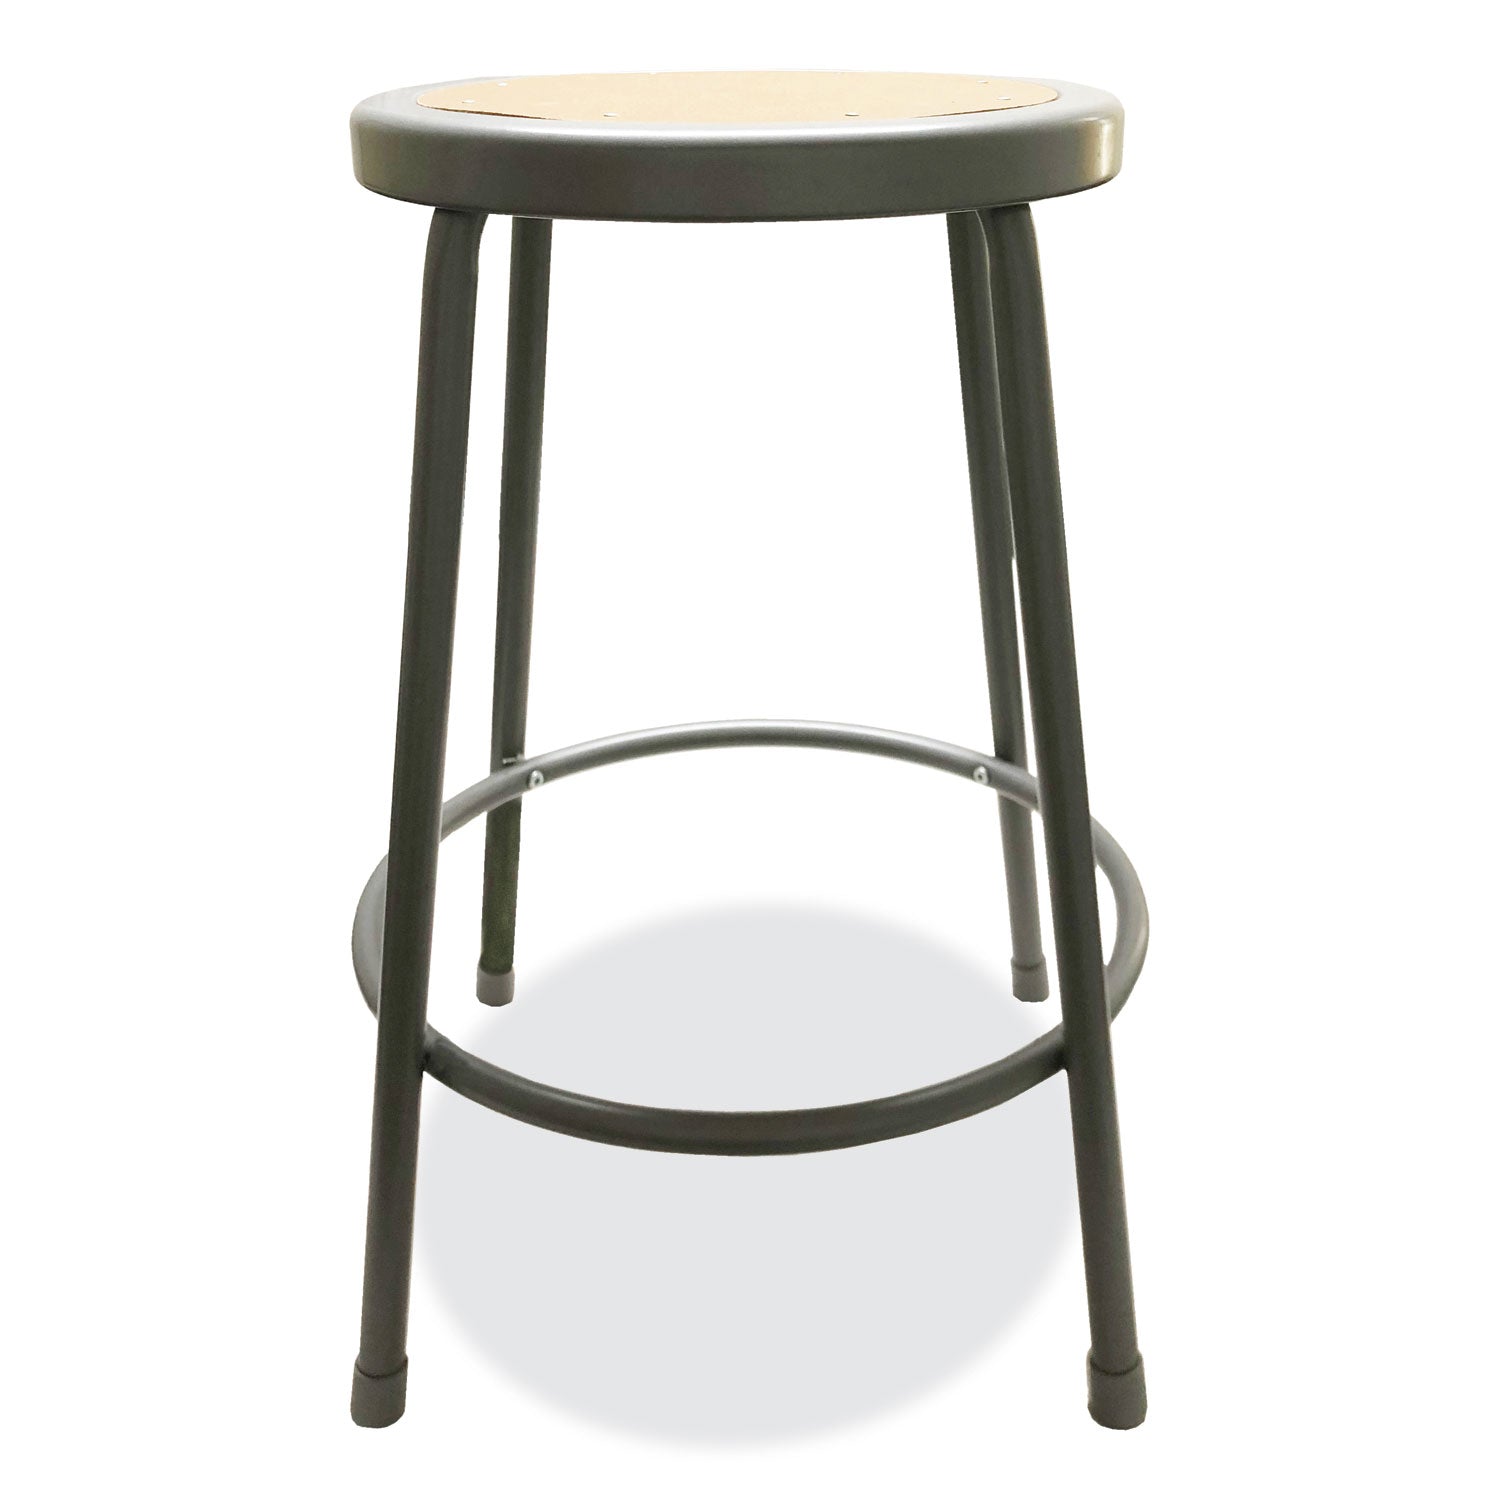 industrial-metal-shop-stool-backless-supports-up-to-300-lb-24-seat-height-brown-seat-gray-base_aleis6624g - 1